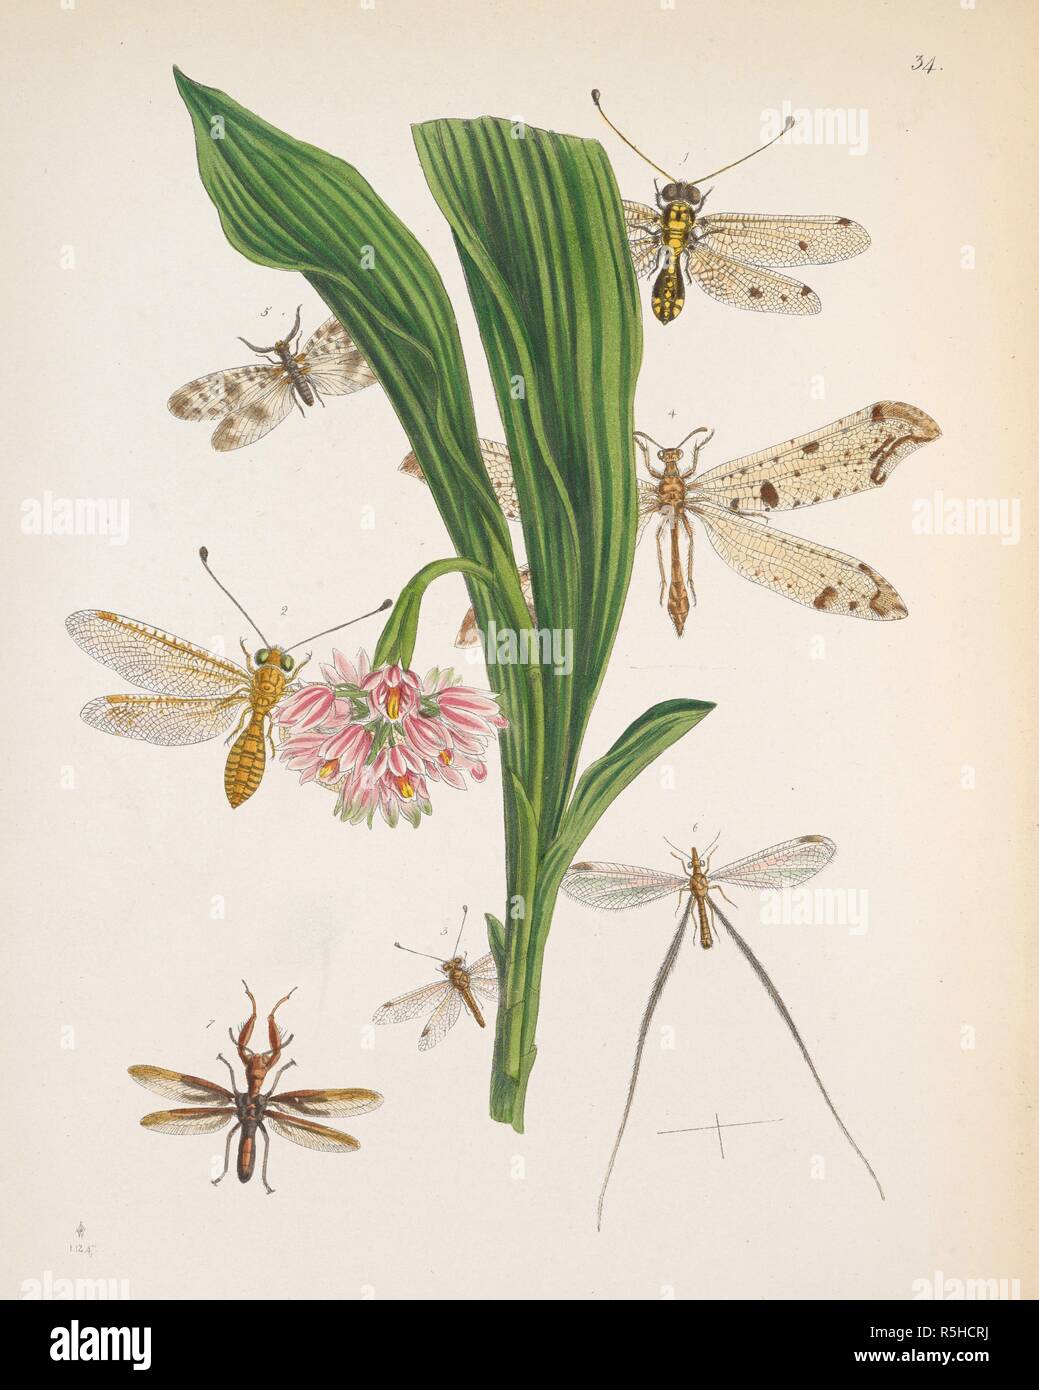 Net-winged insects, includes the lacewings, mantidflies, antlions, and their relatives. (ORDER â€” NEUROPTERA. Section â€” SuBNEcr.oMORrnoTicA. Sub-Section â€” Planipennes.  FIGURE 1. ASCALAPHUS (OGCOGASTER) TESSELLATUS. FIGURE 2. ASCALAPHUS (OGCOGASTER) SEGMENTATOR. FIGURE 3. ASCALAPHUS (BUBO) CANIFRONS. FIGURE 4. MYRMELEON SINGULARE. FIGURE 5. CHAULIODES SUBFASCIATUS. FIGURE 6. NEMOPTERA FILIPENNIS. FIGURE 7. MANTISPA NODOSA.       . The Cabinet of Oriental Entomology; being a selection of some of the rarer and more beautiful species of Insects, natives of India and the adjacent islands. Lon Stock Photo